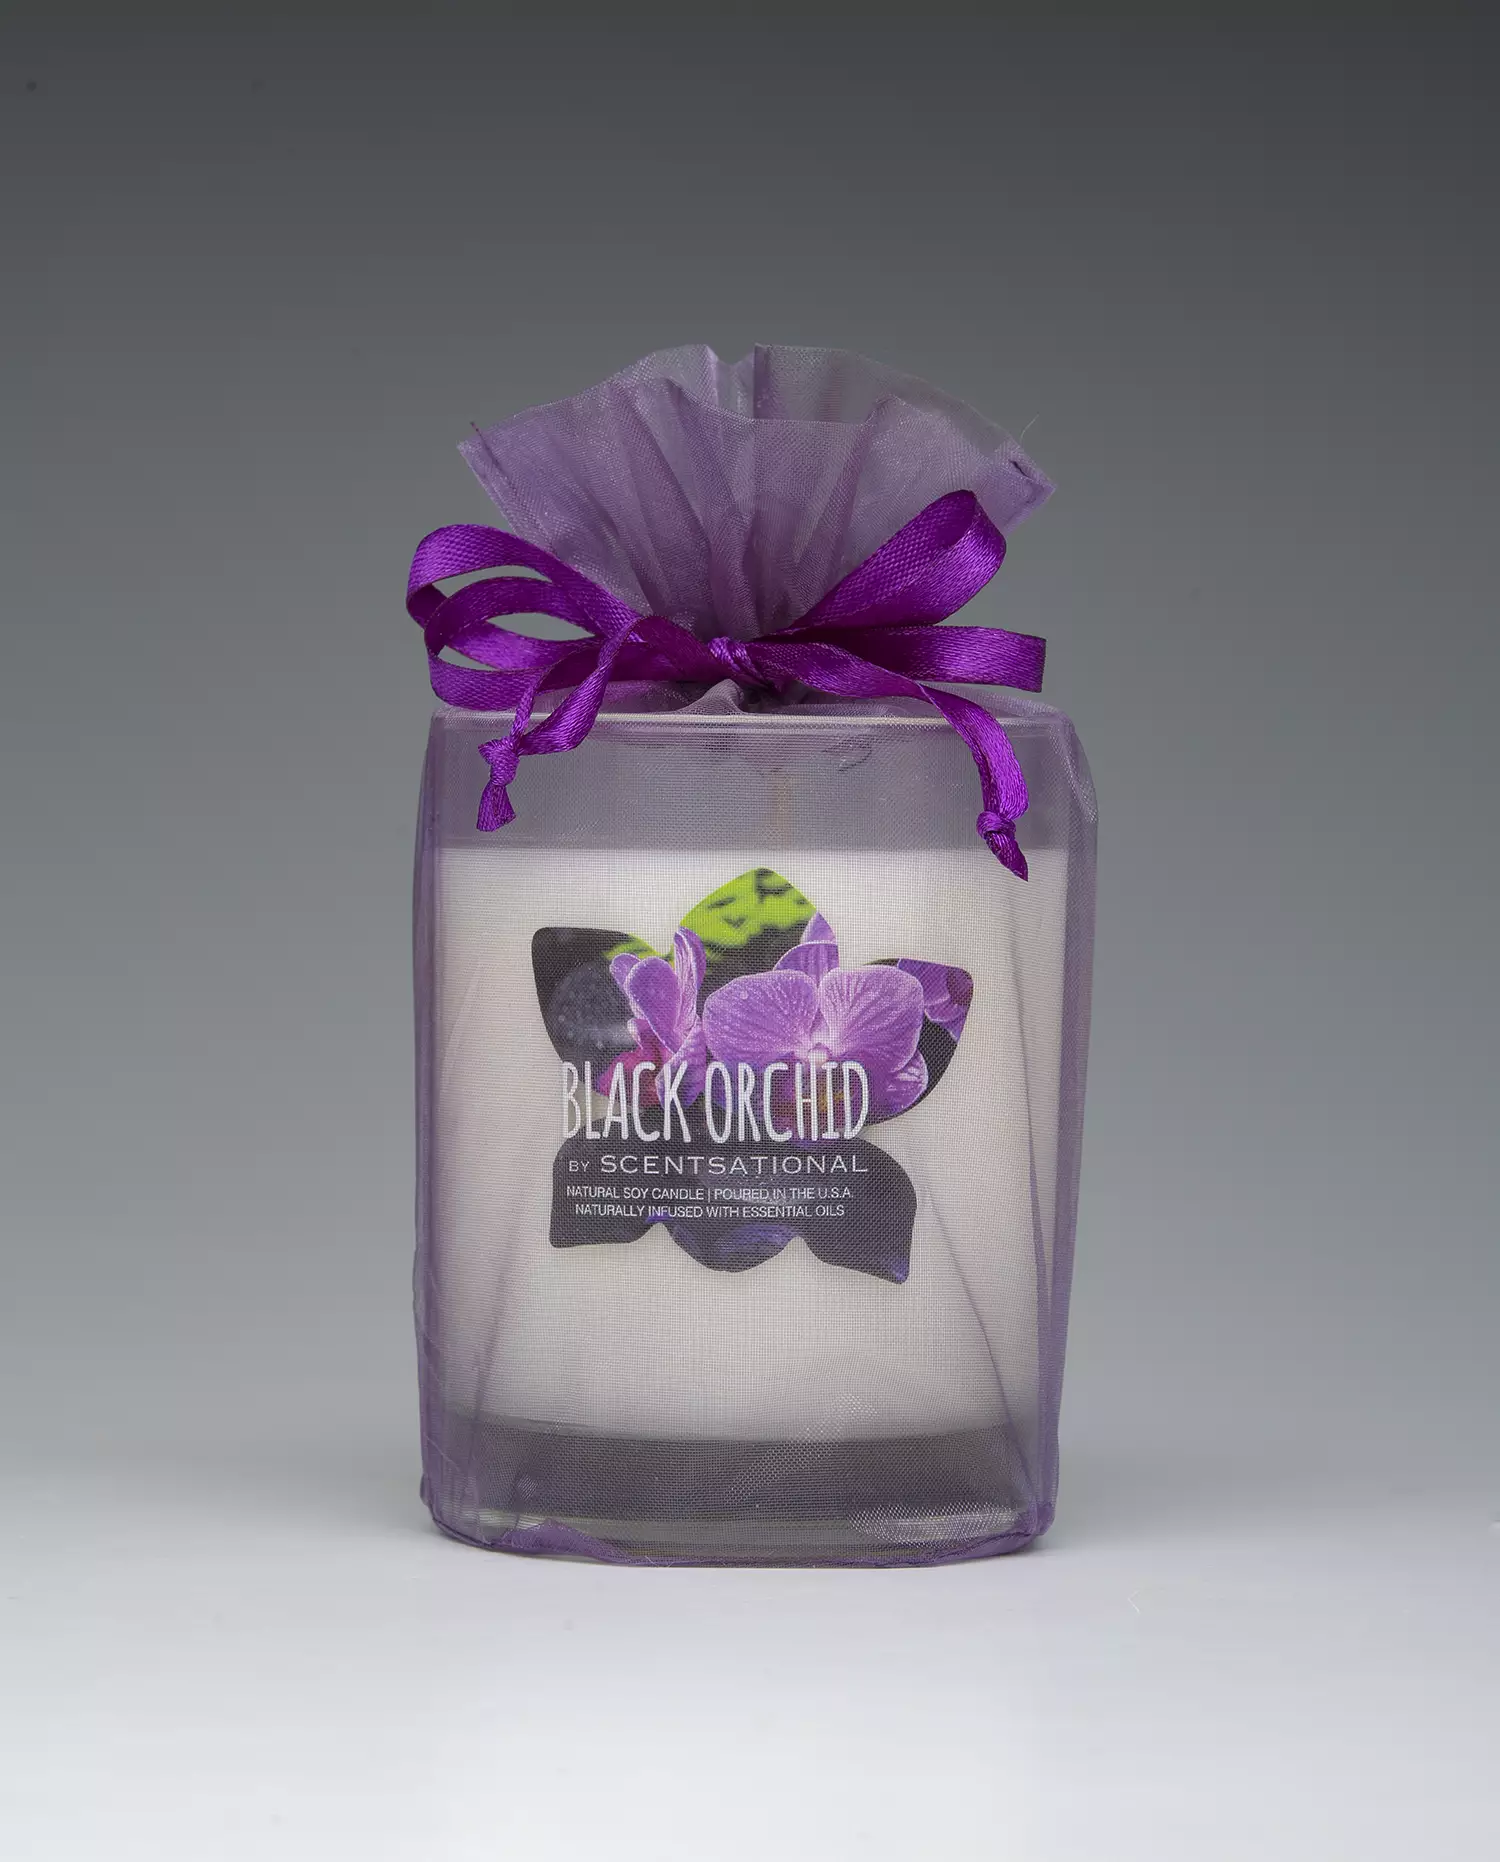 Scentsational Candle Soy Wax Blend 5 oz Black Orchid Single Wick Glass Jar 